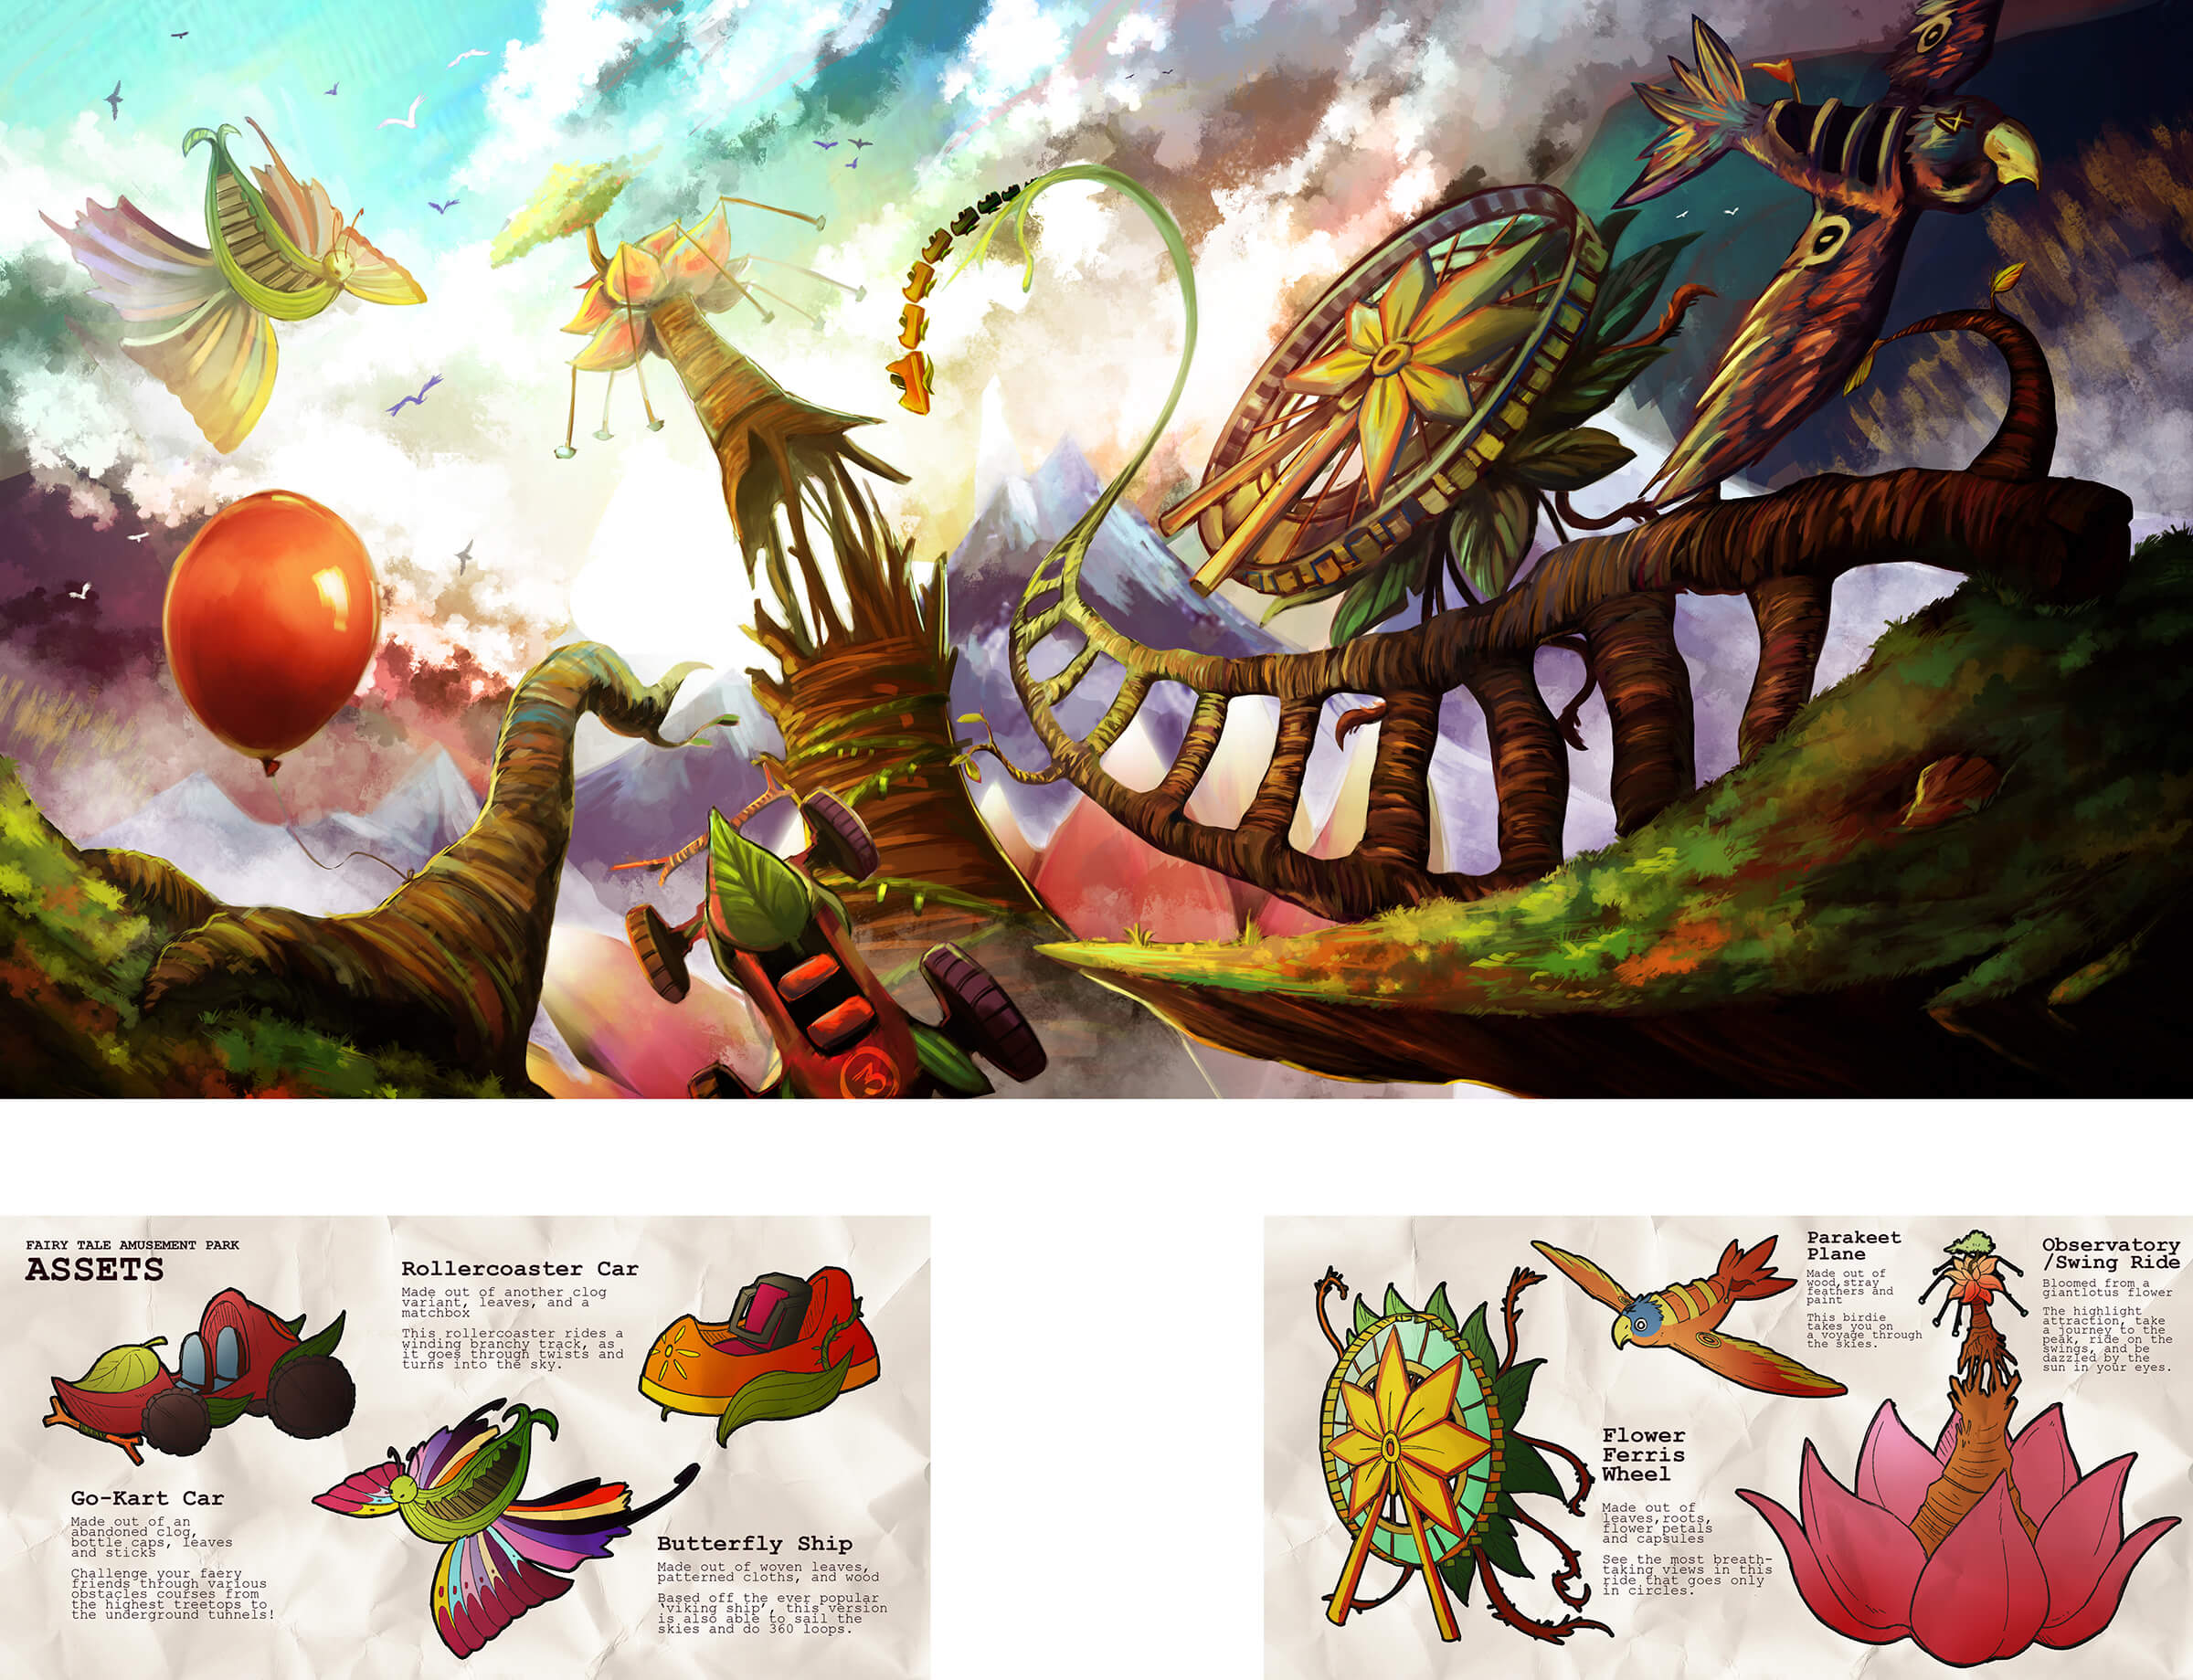 Colorful concept art for the rides in an organic theme park with attractions seemingly built out of living plants and animals